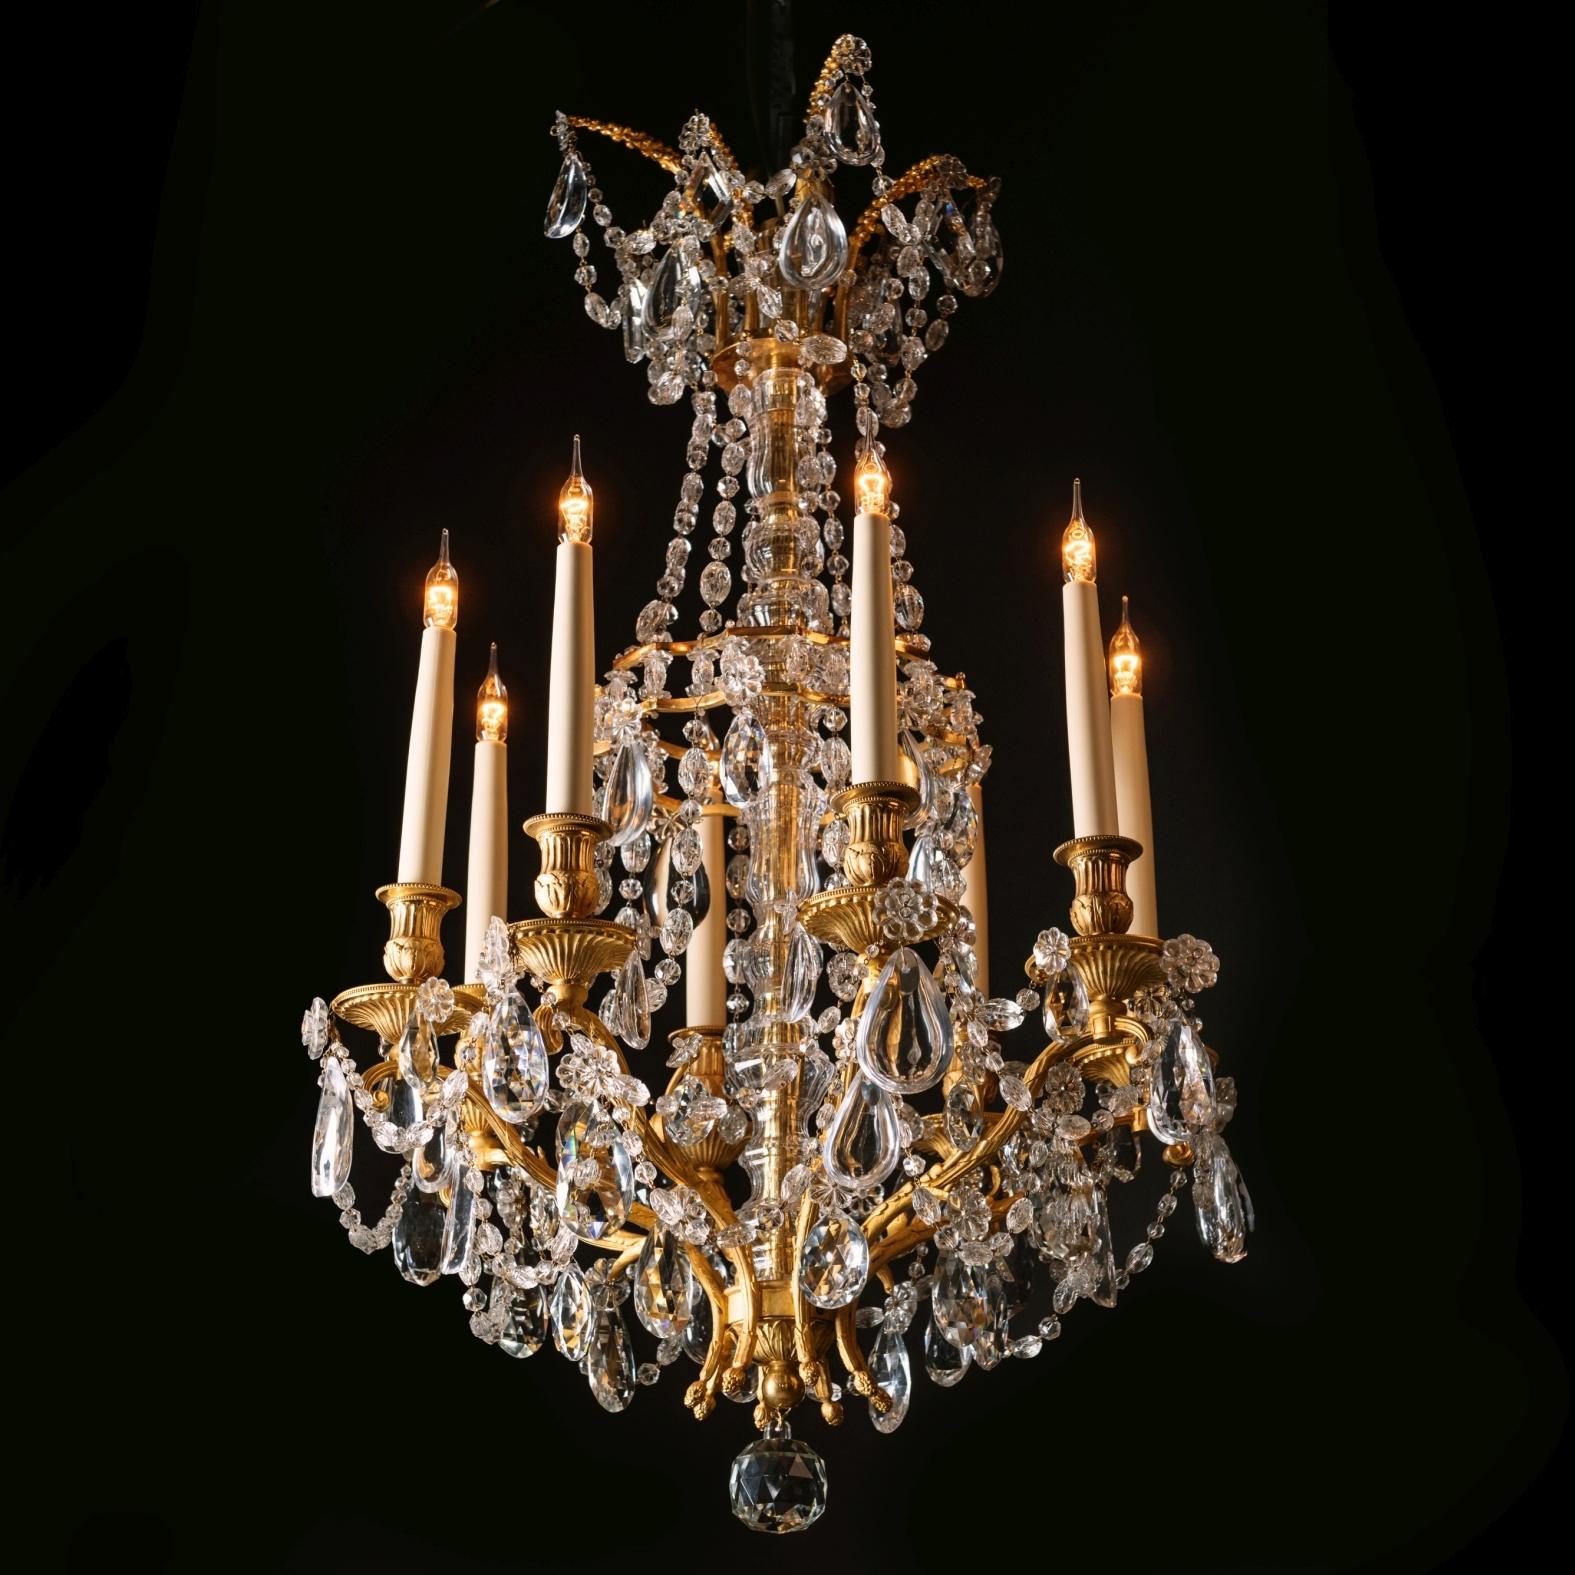 French Louis XVI Style Gilt-Bronze and Cut-Glass Eight-Light Chandelier For Sale